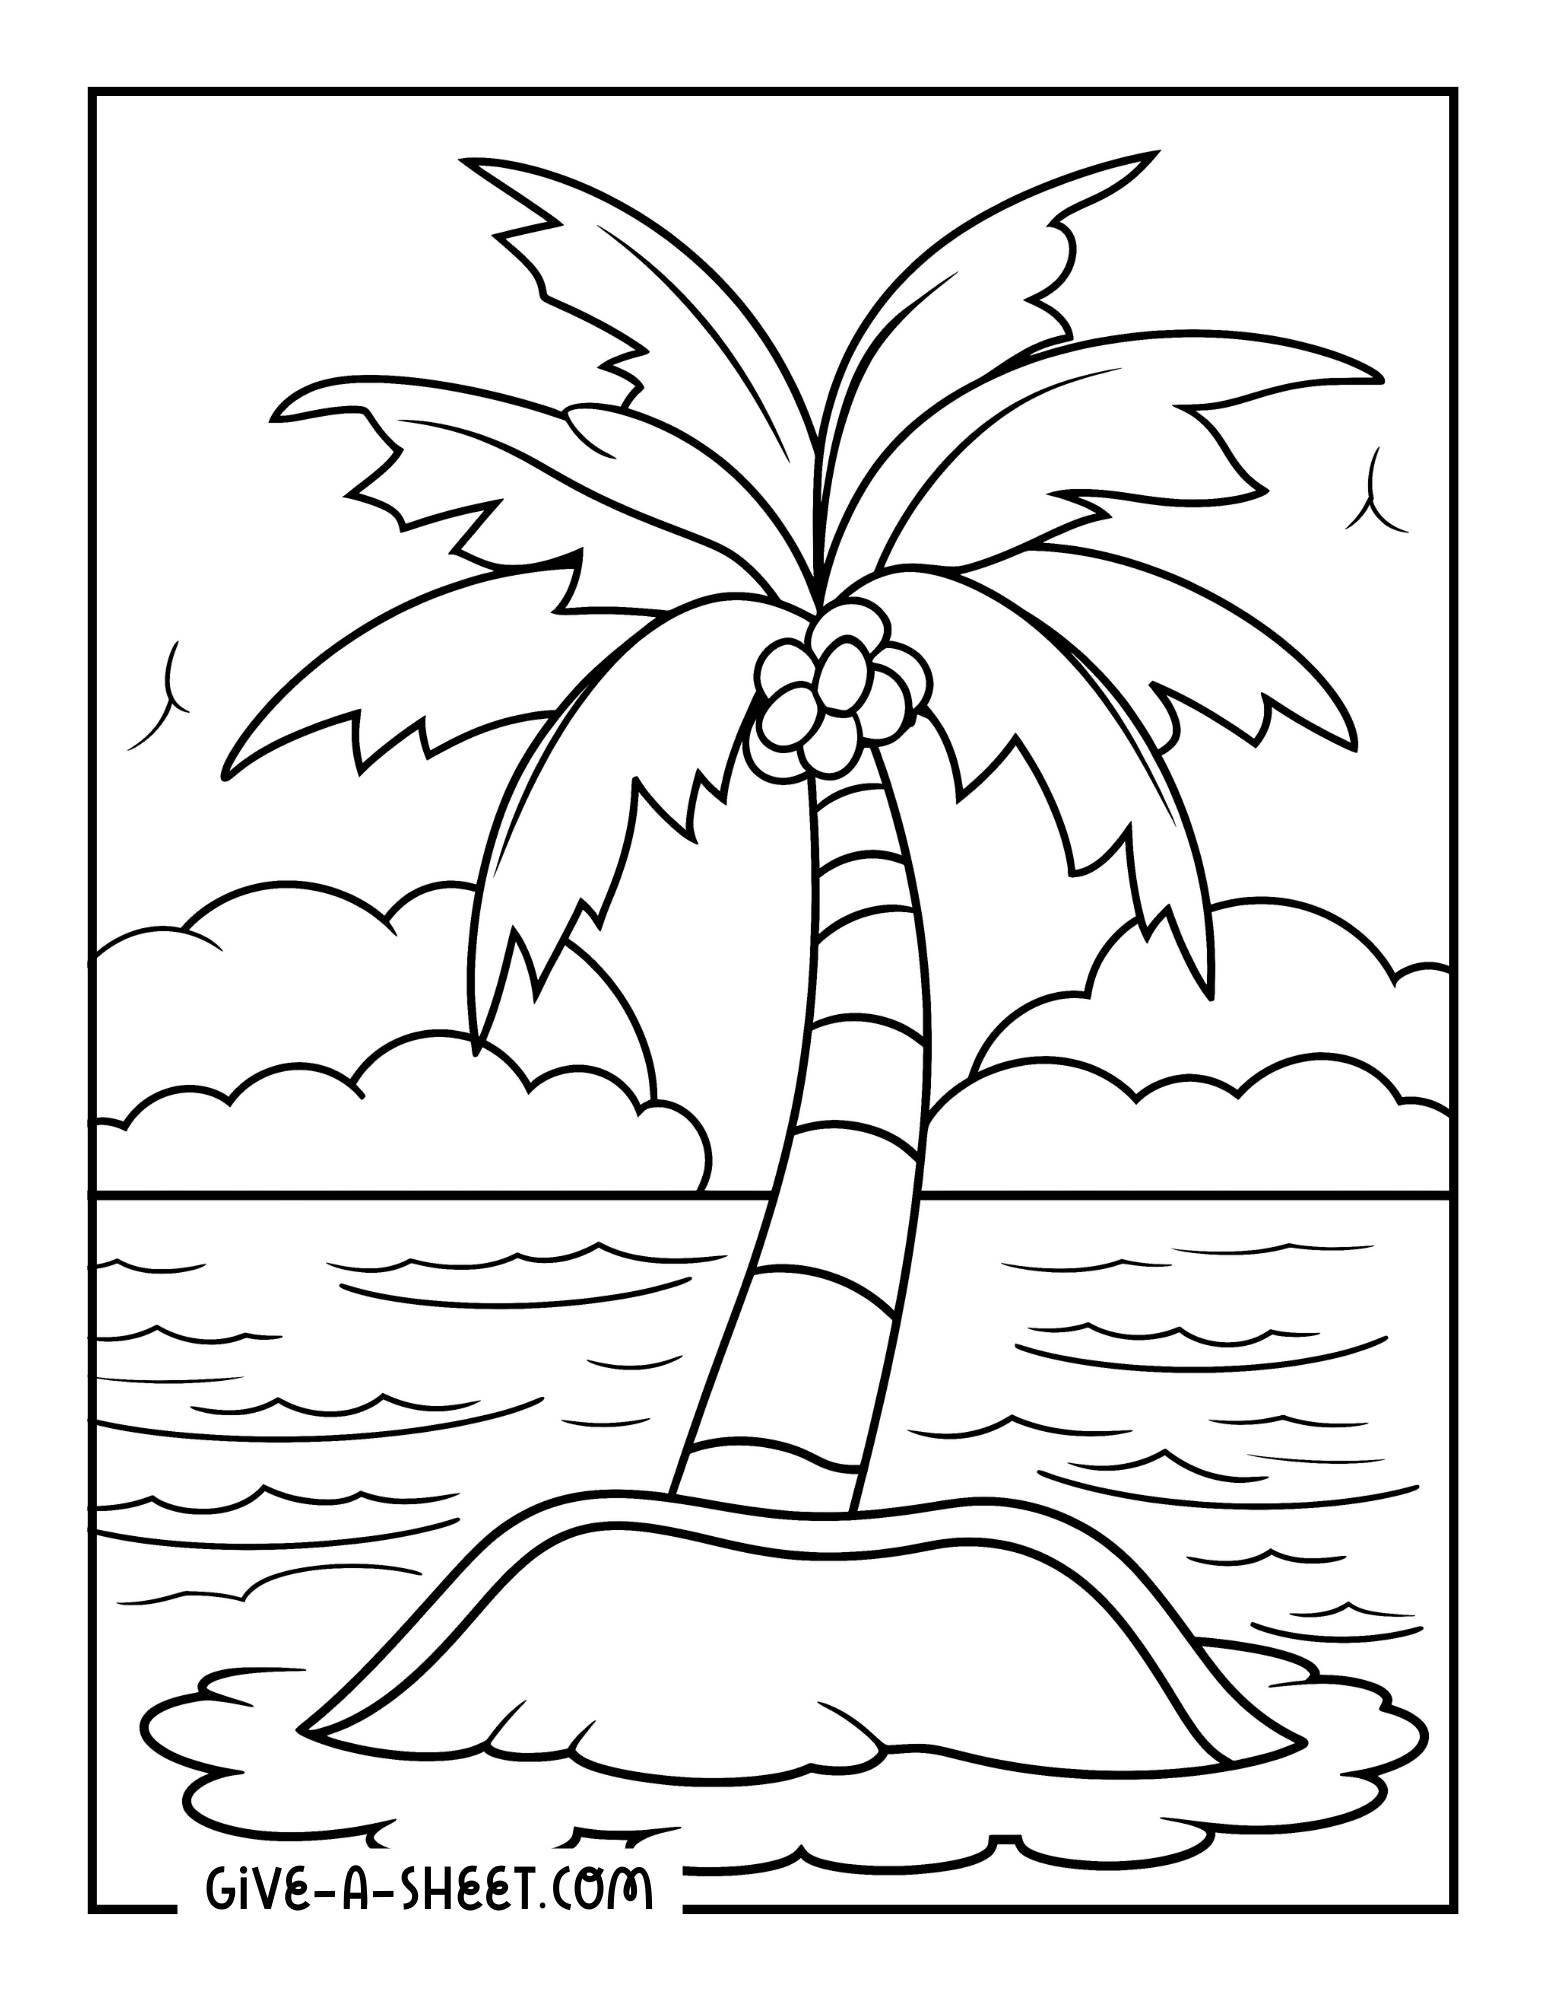 Coconut palm trees on the beach coloring page.